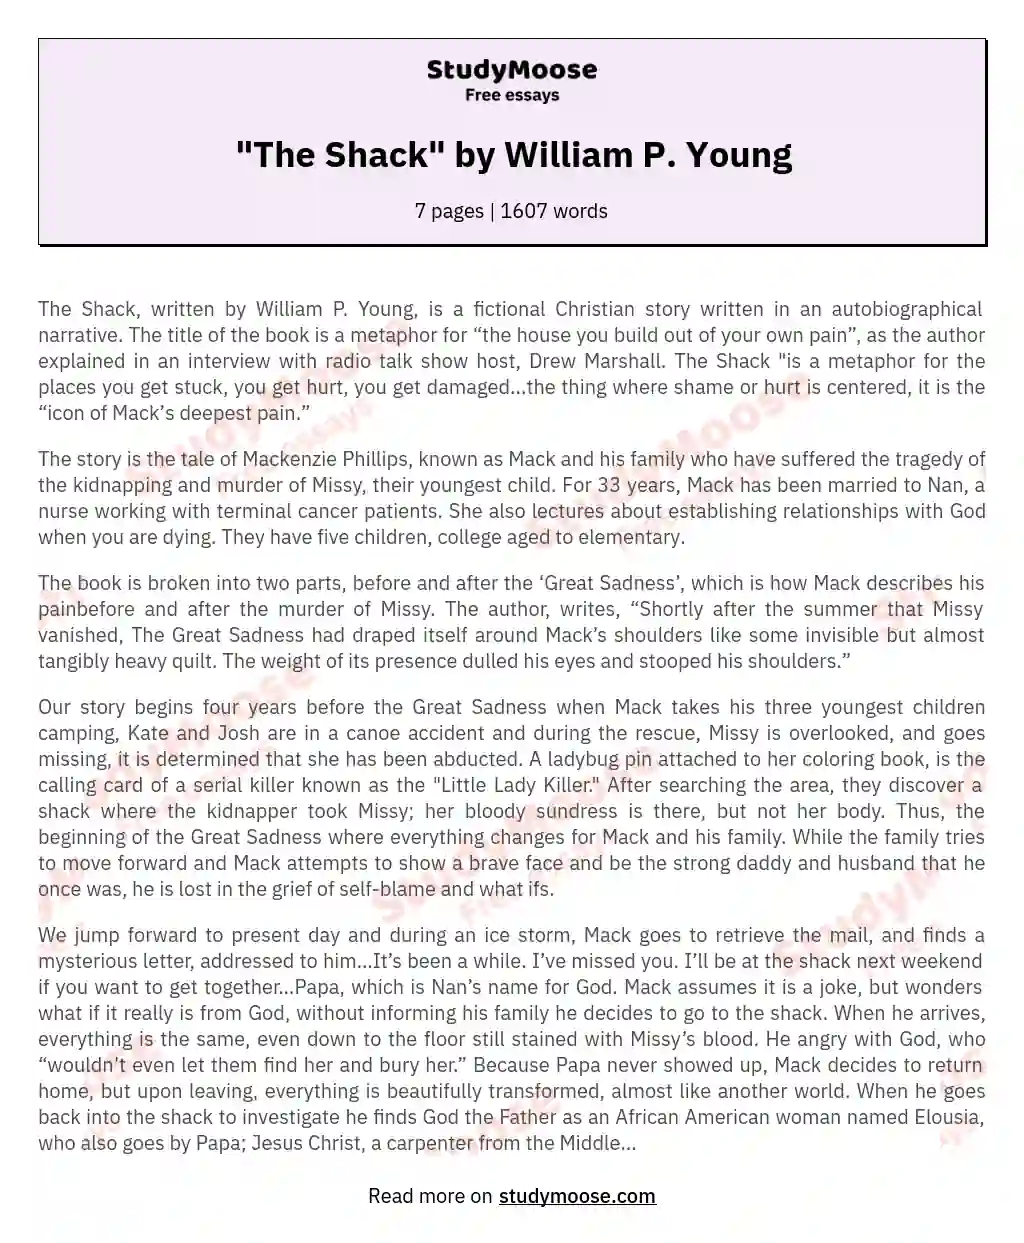 "The Shack" by William P. Young essay